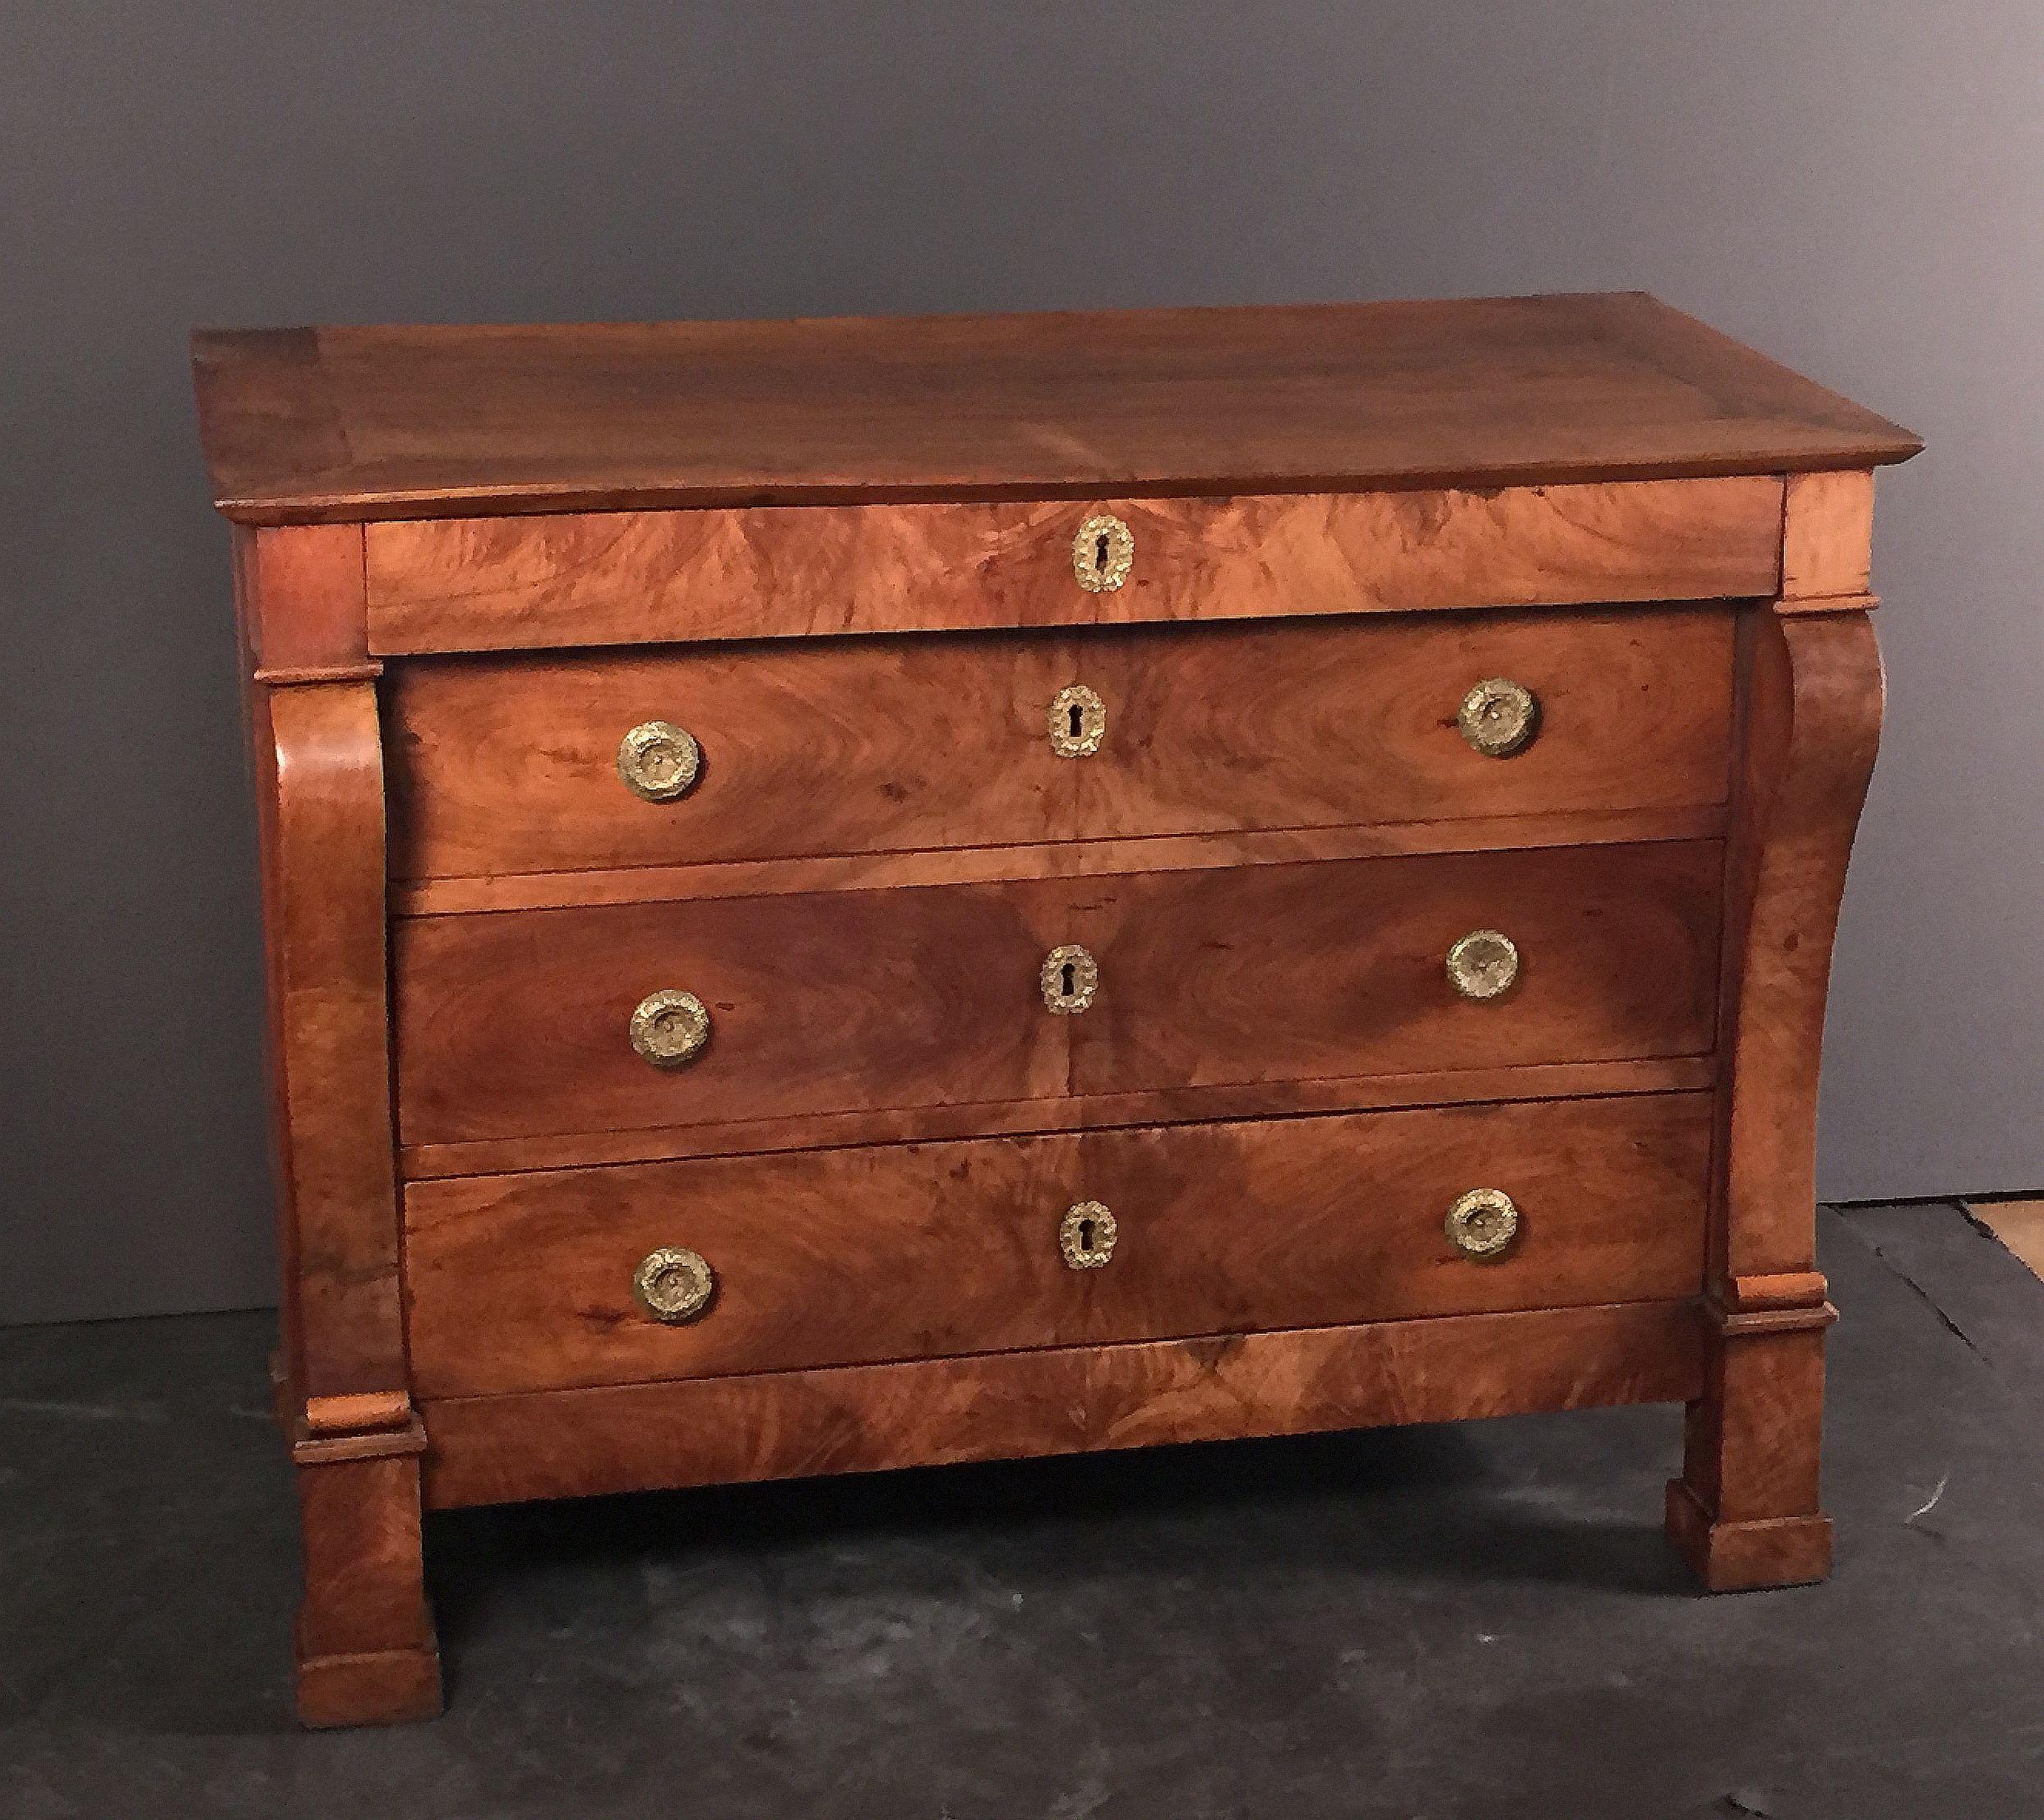 A fine French chest of drawers of beautifully patinated walnut from the Restauration period, featuring four drawers with ornamental hardware and escutcheons, flanked on each side by curved consoles, and resting on shaped feet.